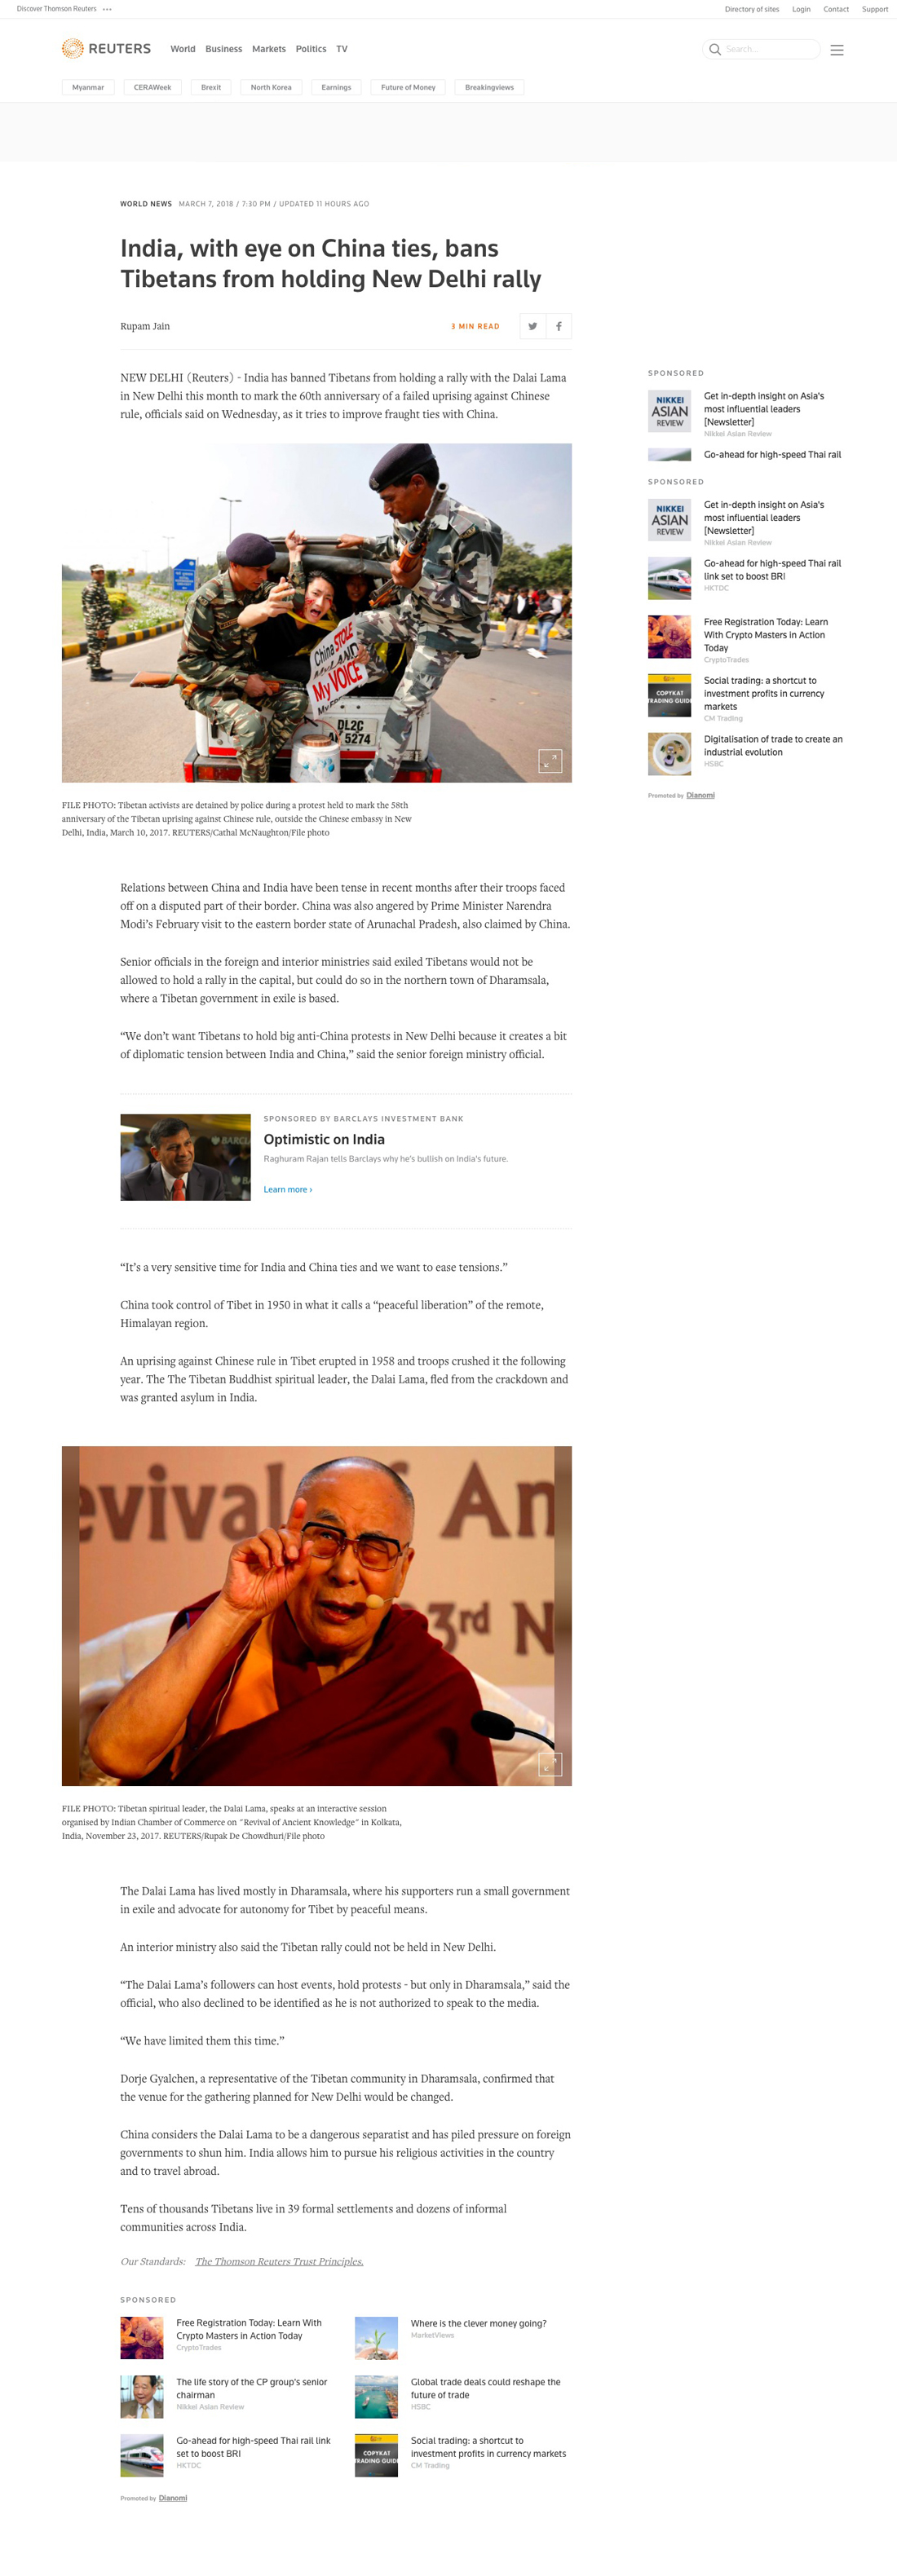 Click to enlarge (Source: https://www.reuters.com/article/us-india-china-tibet/india-with-eye-on-china-ties-bans-tibetans-from-holding-new-delhi-rally-idUSKCN1GJ1HP)